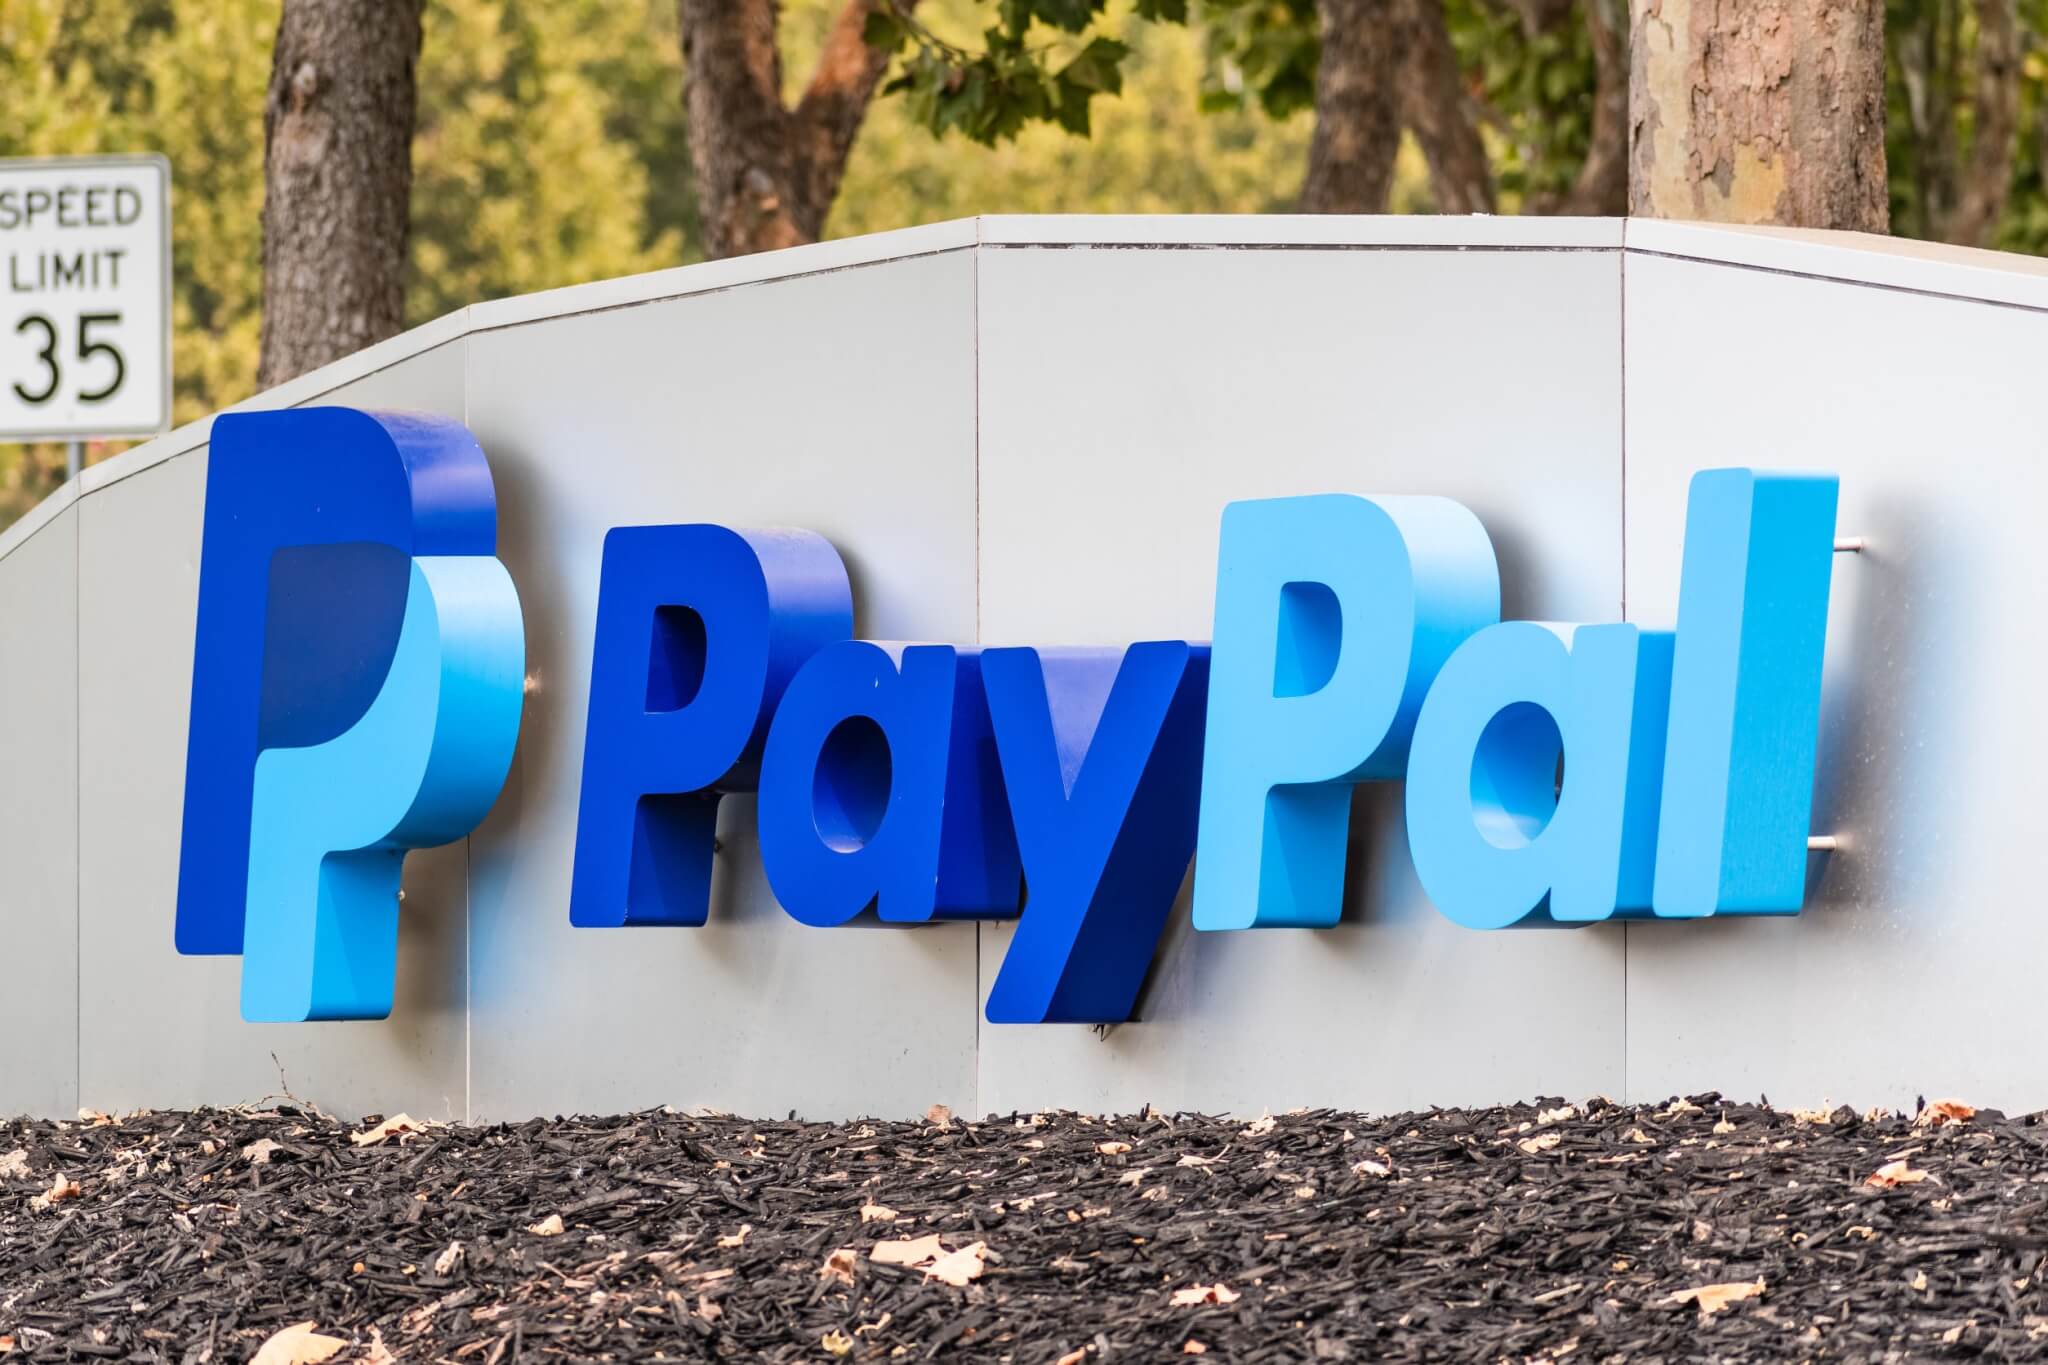 paypal to halt crypto sales uk october 1st